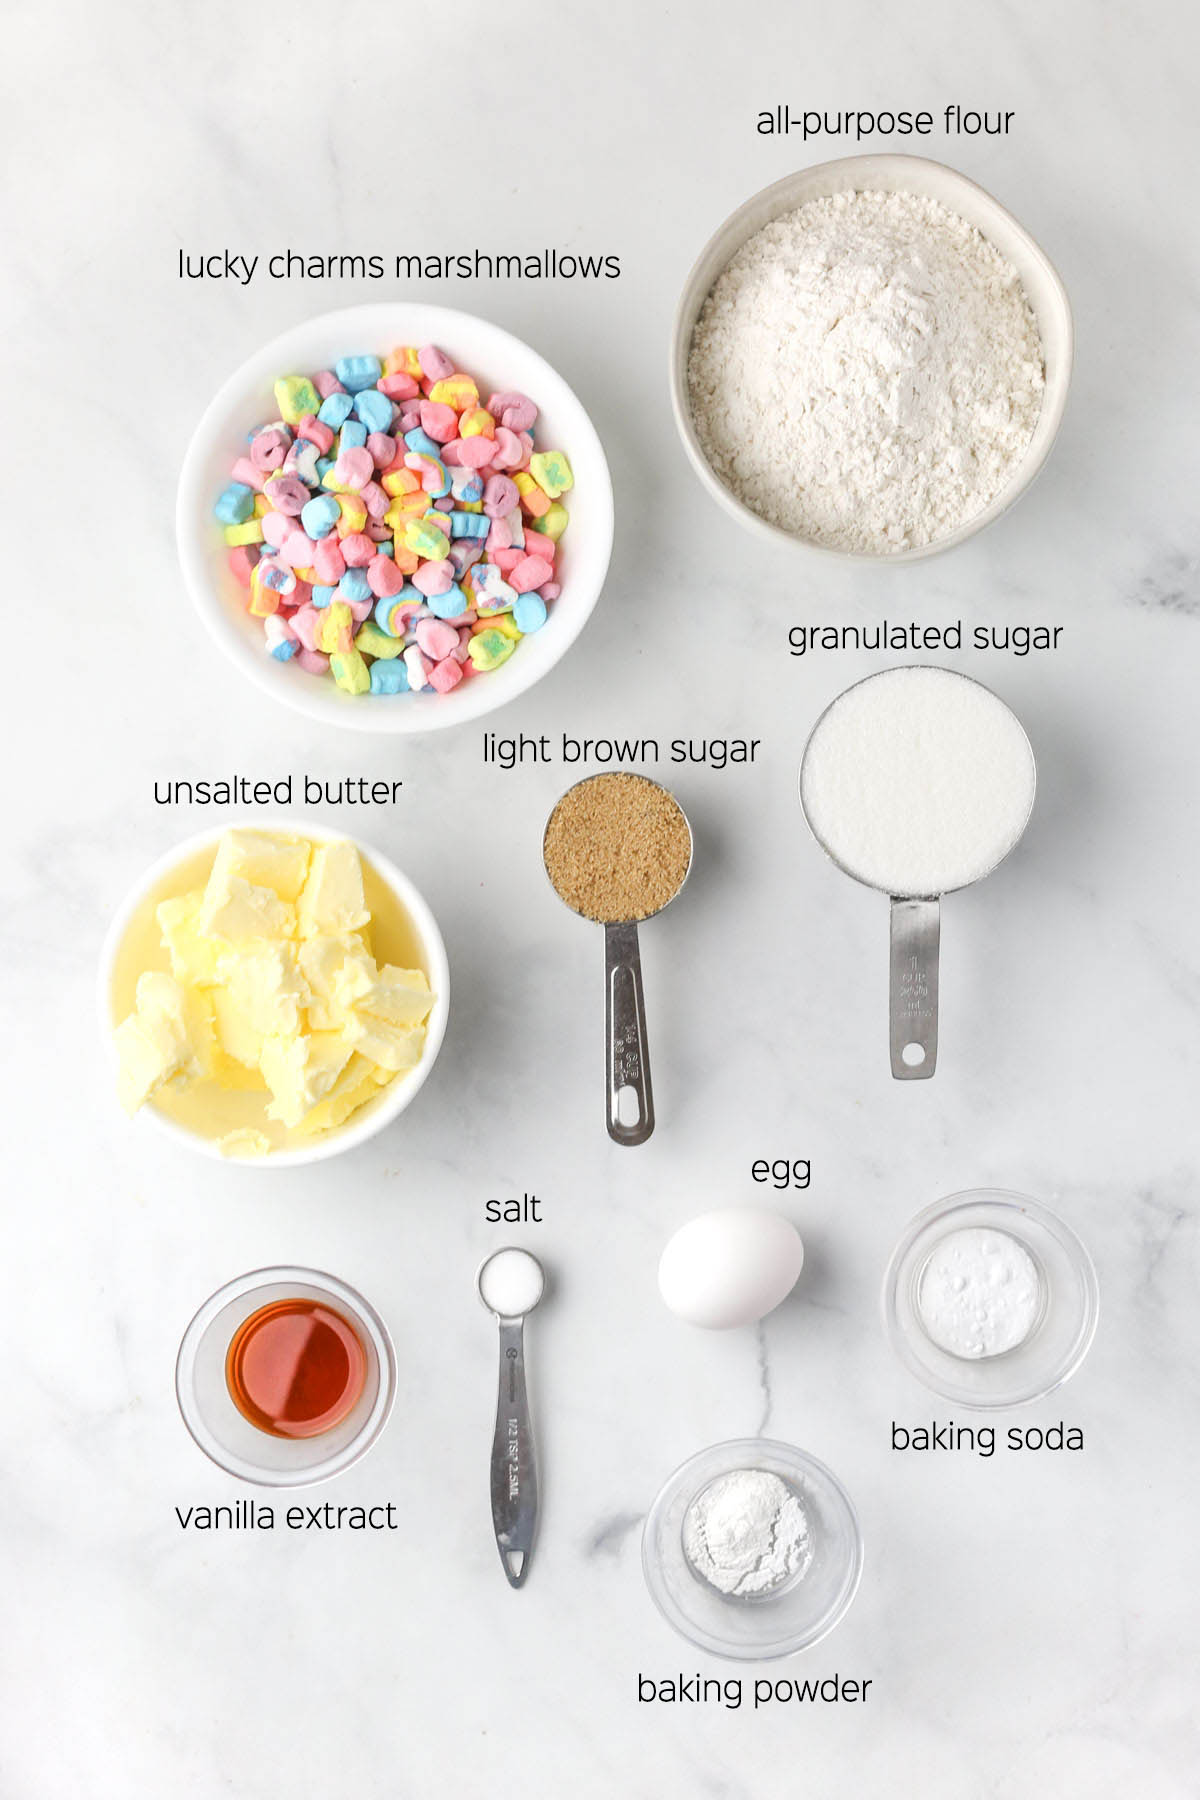 All ingredients to make the lucky charms sugar cookies prepared in small bowls and dishes on a marble surface.